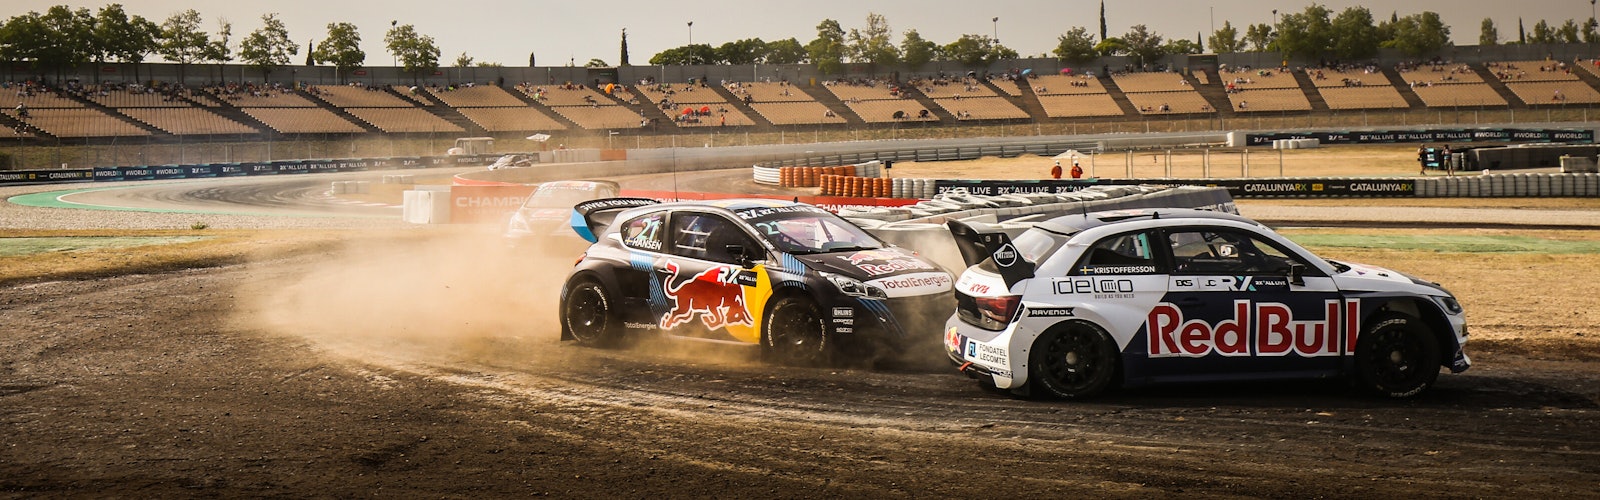 World RX Action